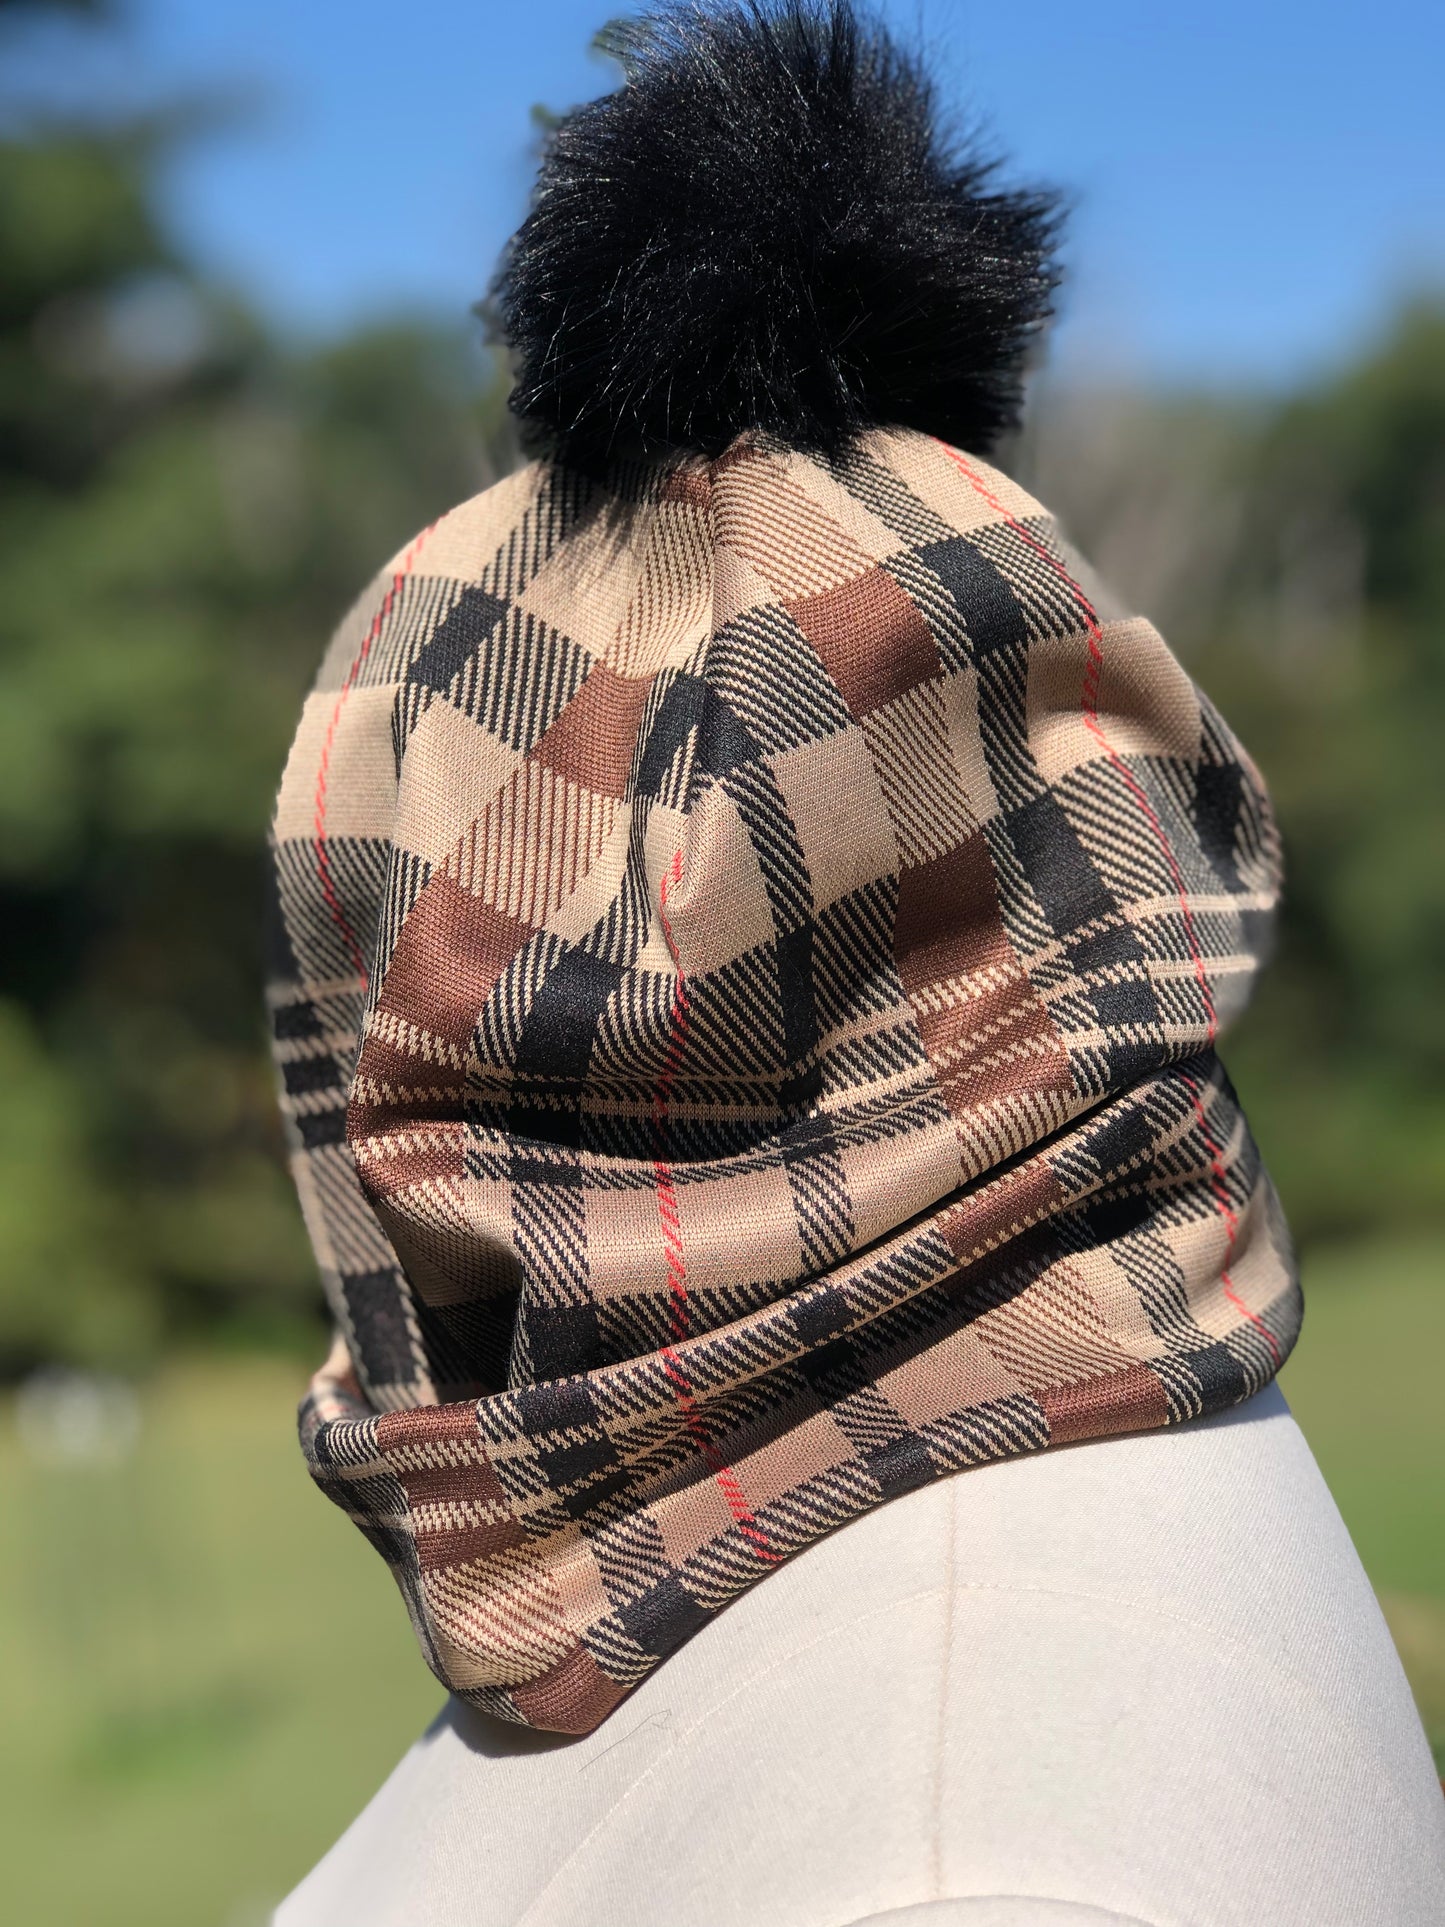 Tan, Brown and Black Plaid Winter Beanie With or Without Pom Pom - Limited Stock